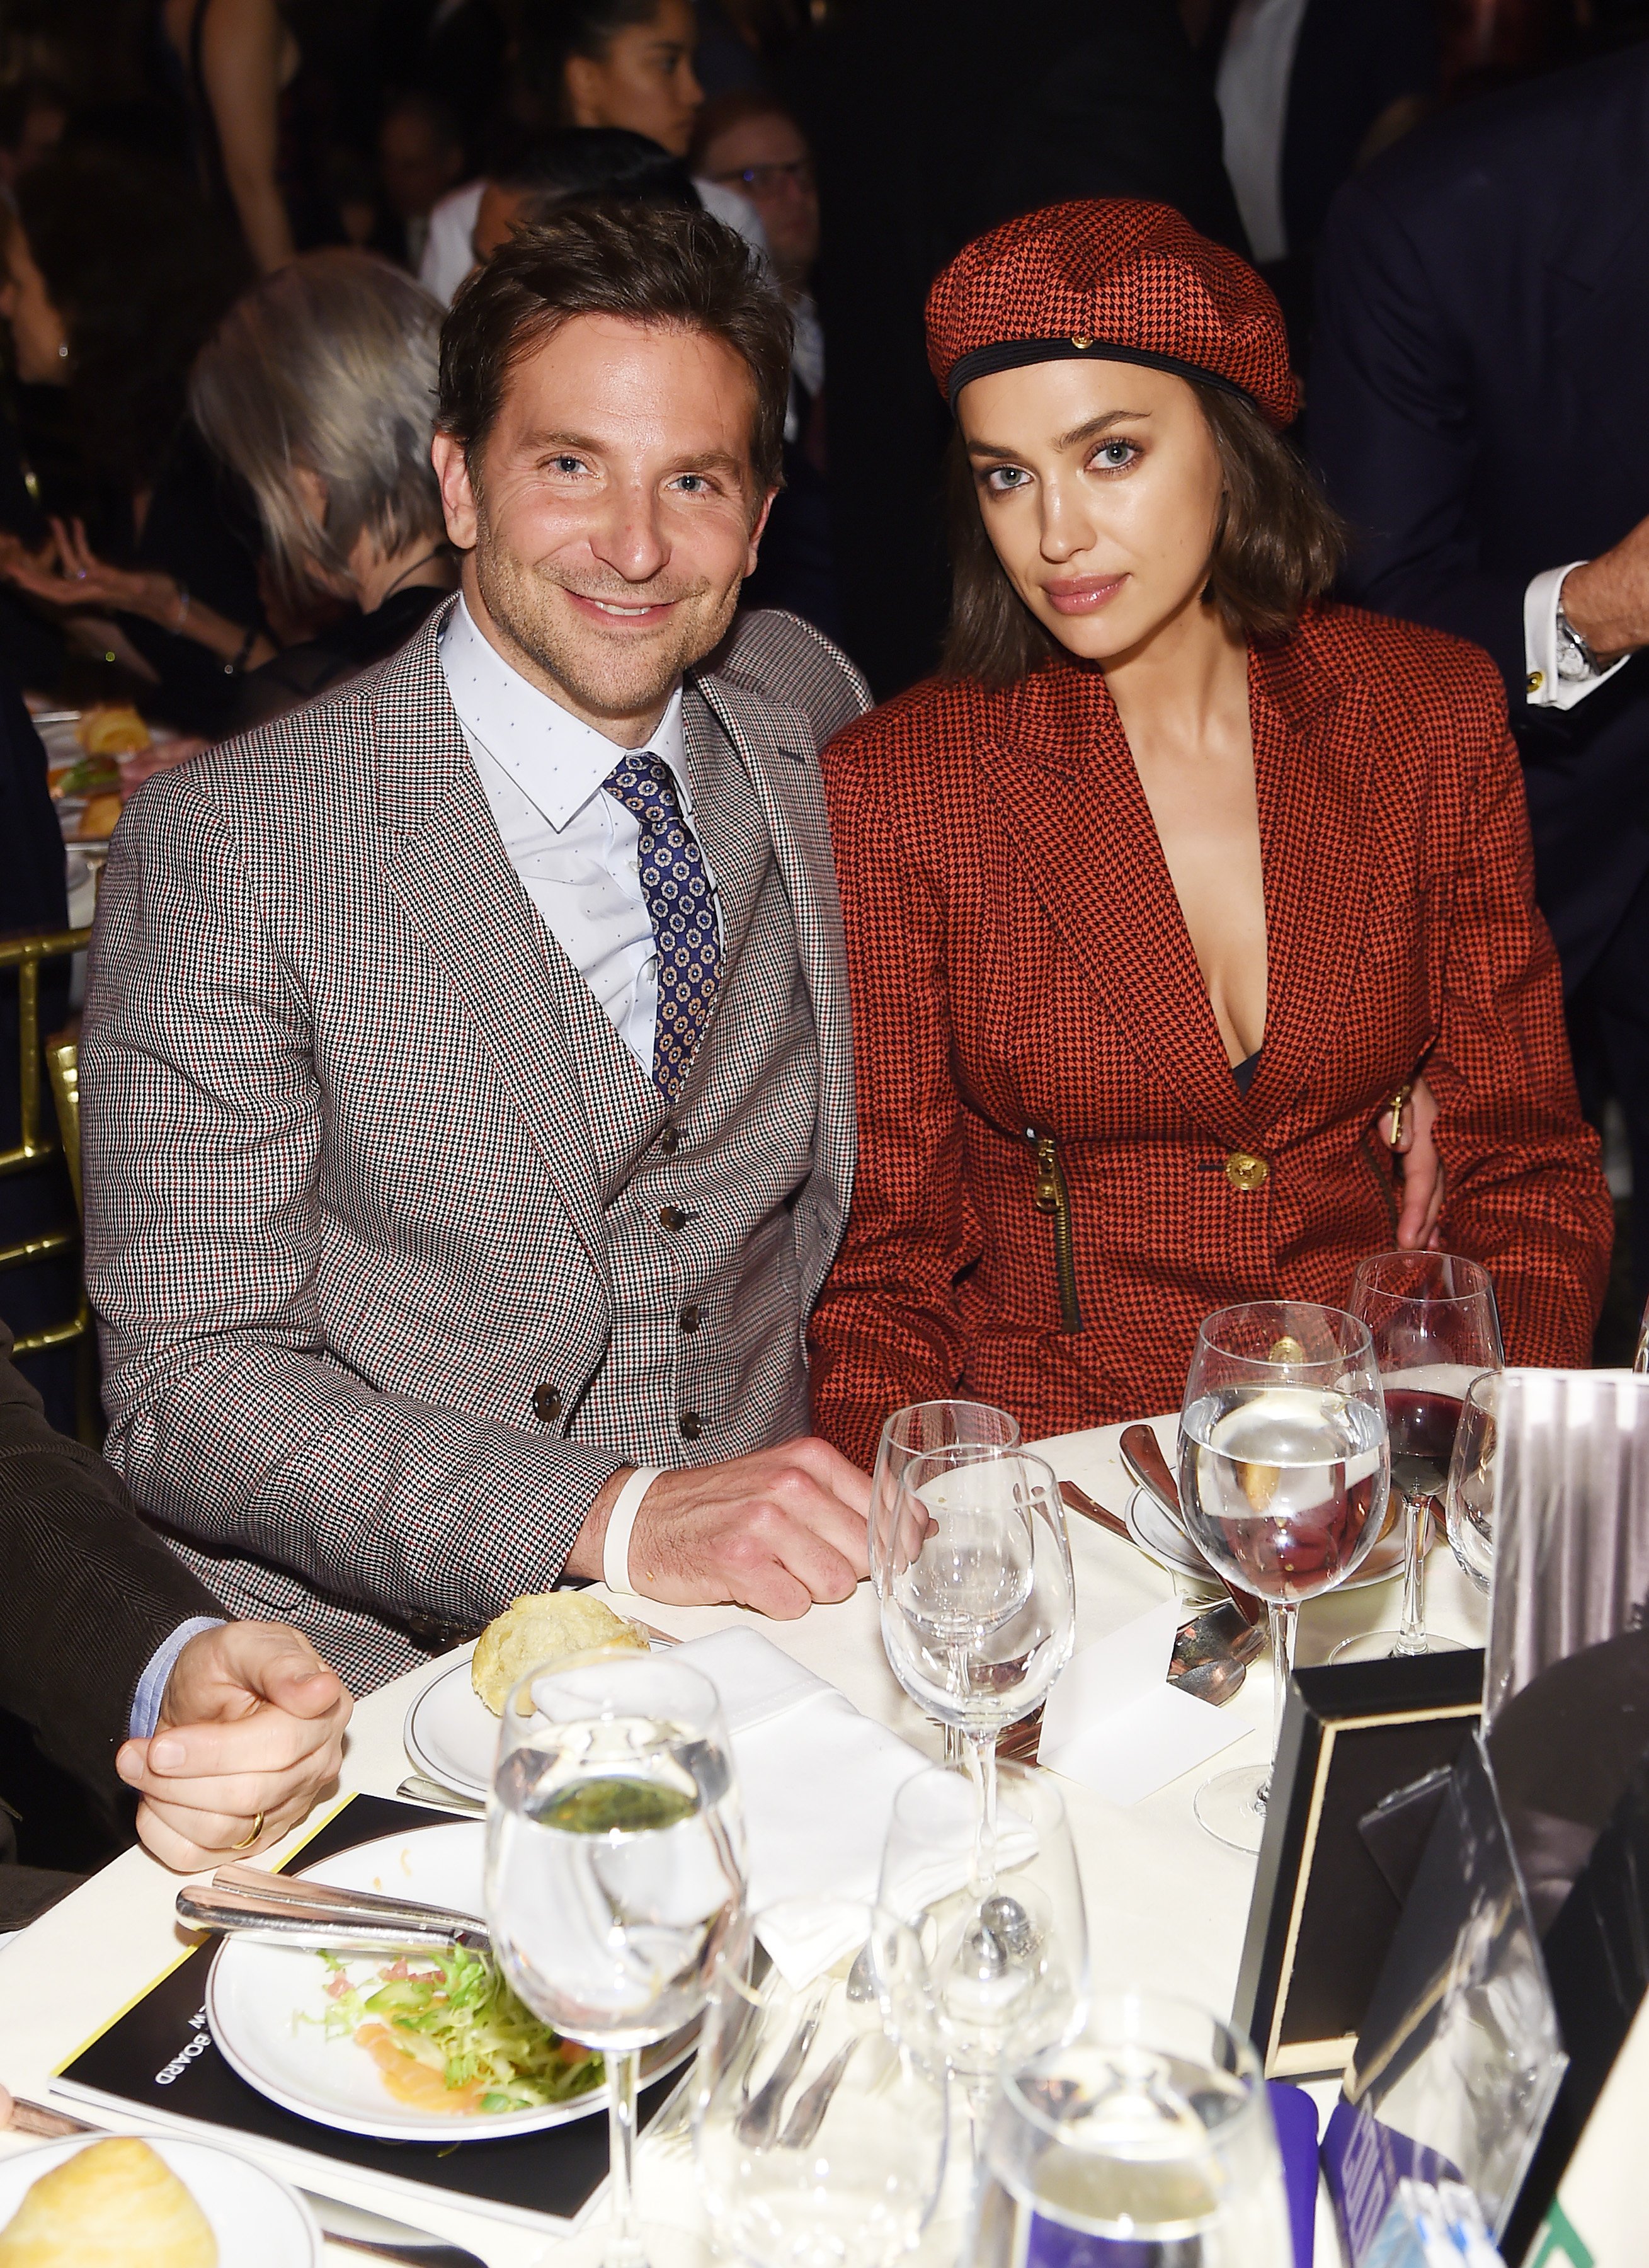 Bradley Cooper and Irina Shayk attend The National Board of Review Annual Awards on January 8, 2019 in New York City